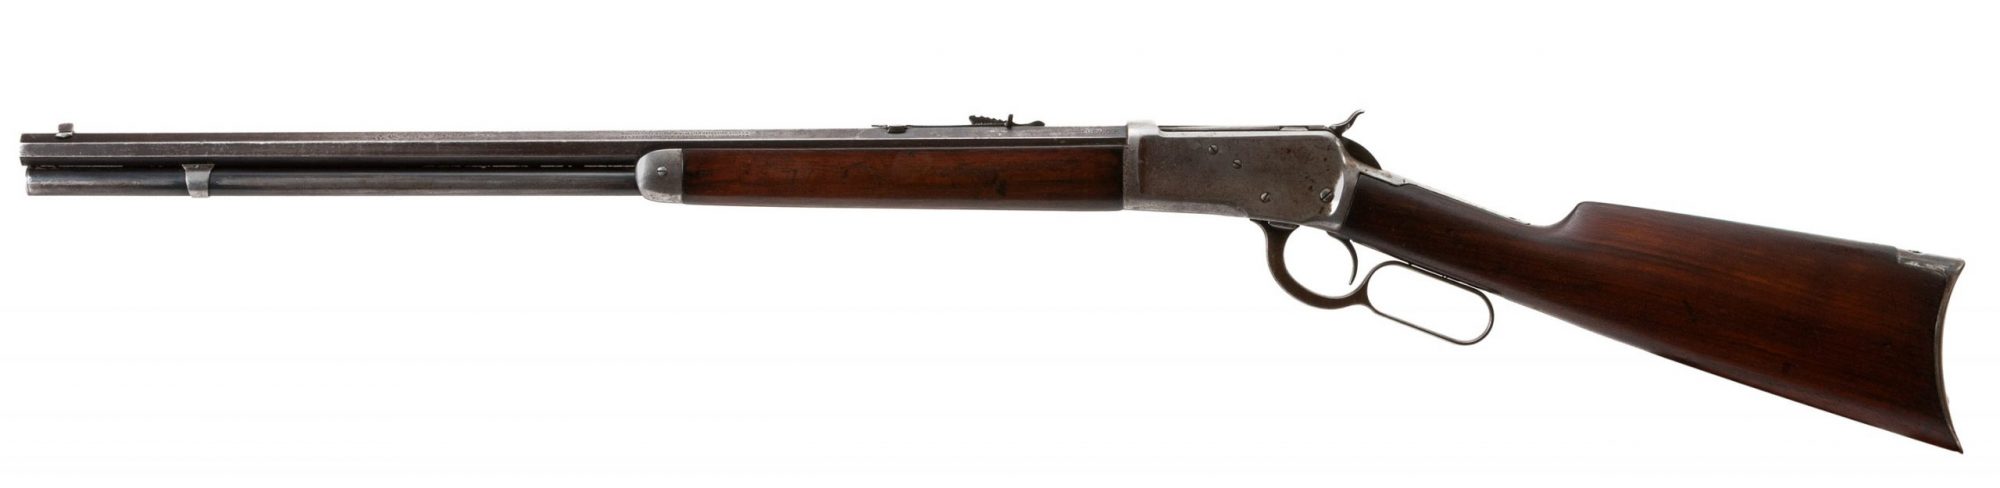 Photo of a pre-owned Winchester Model 1892 from 1917, for sale by Turnbull Restoration of Bloomfield, NY